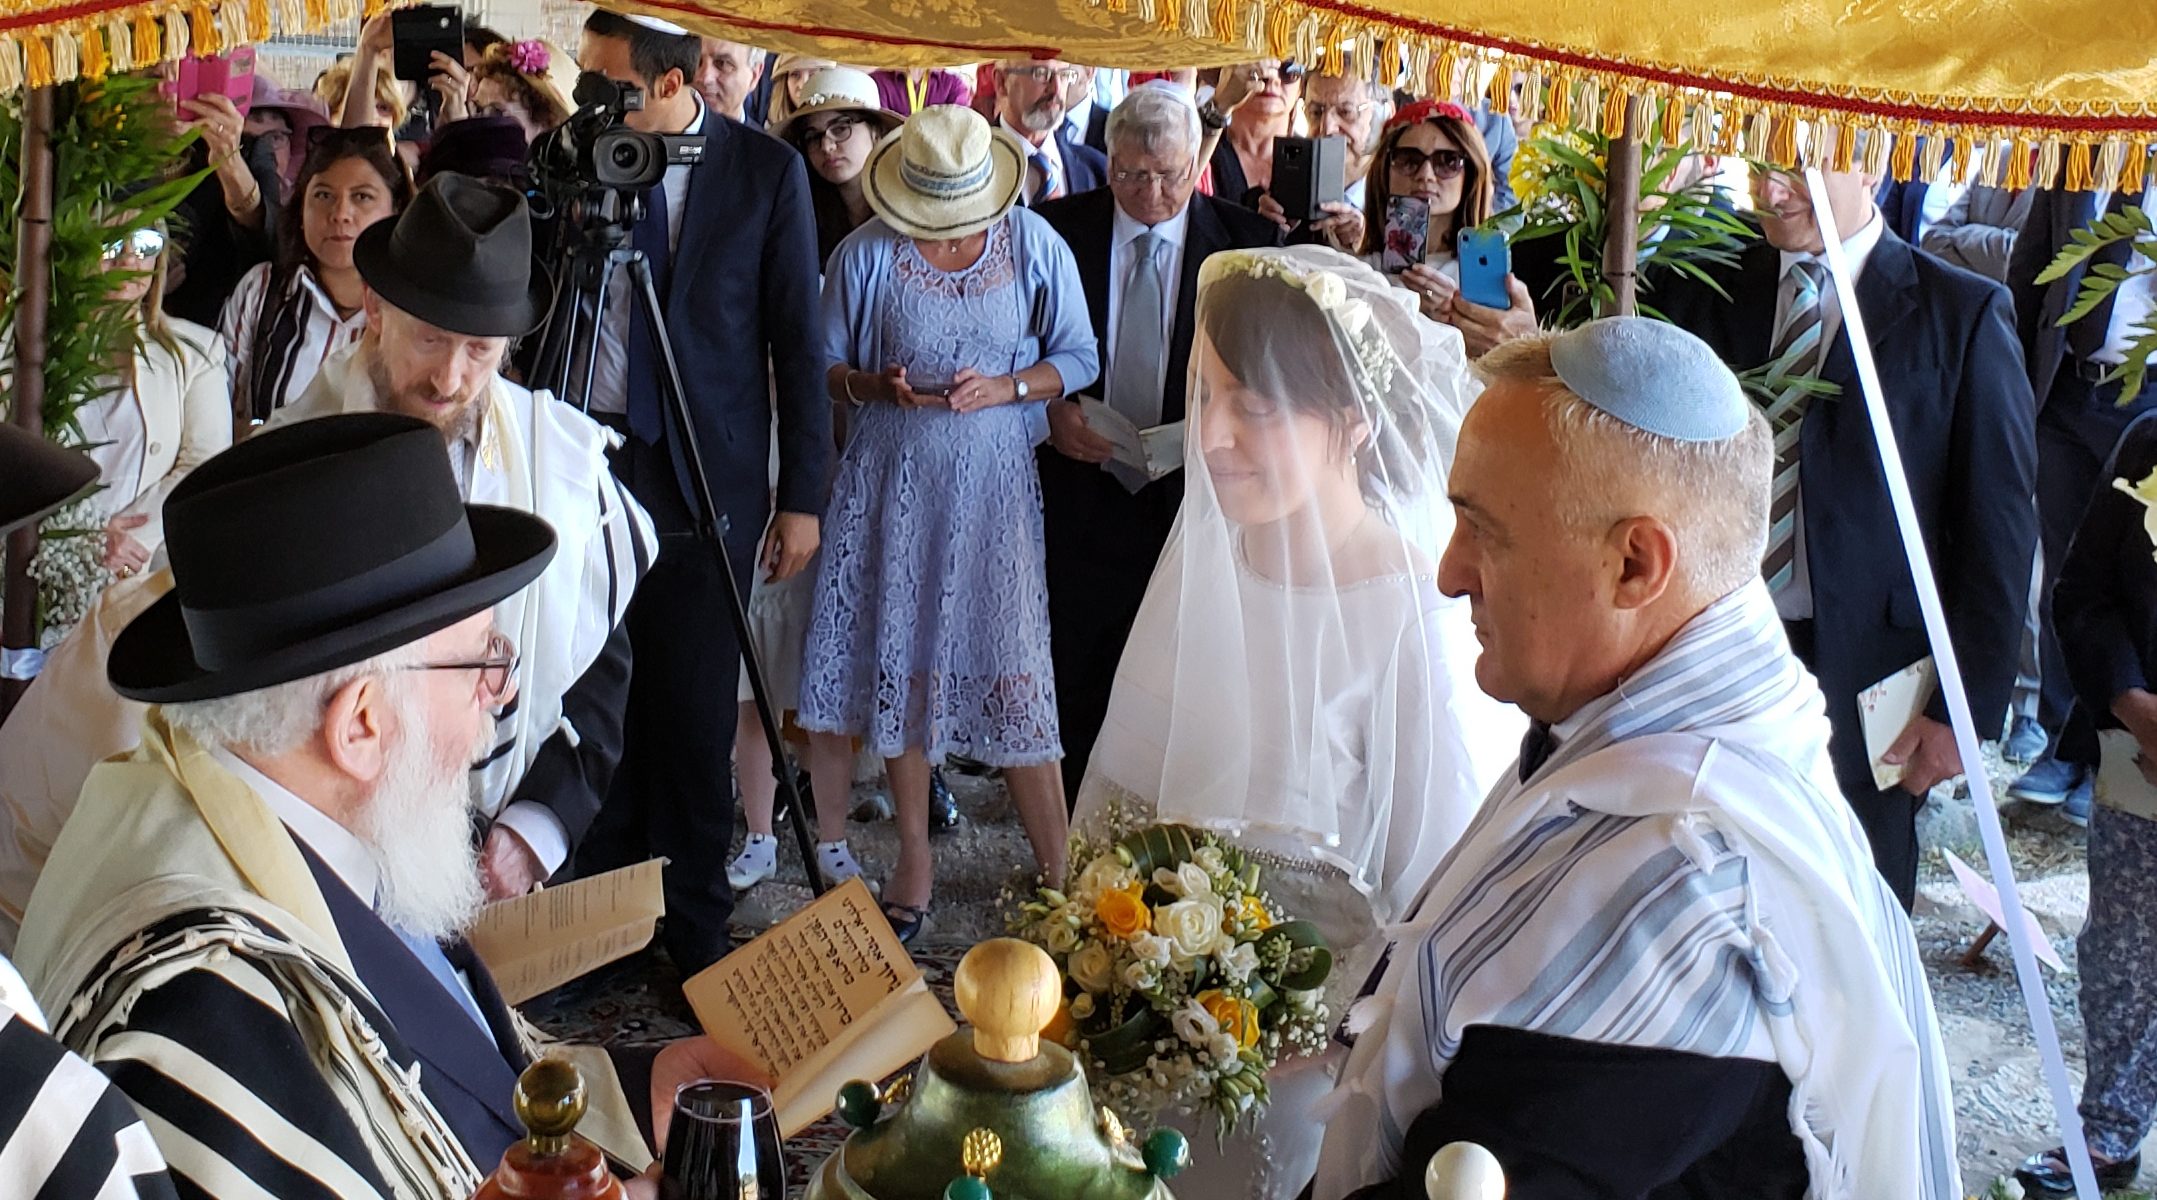 Roque Pugliese and Ivana Pezzoli getting married at the Bova Marina Synagogue in Calabria, Italy on June 4, 2019. (Photo courtesy of Shavei Israel)